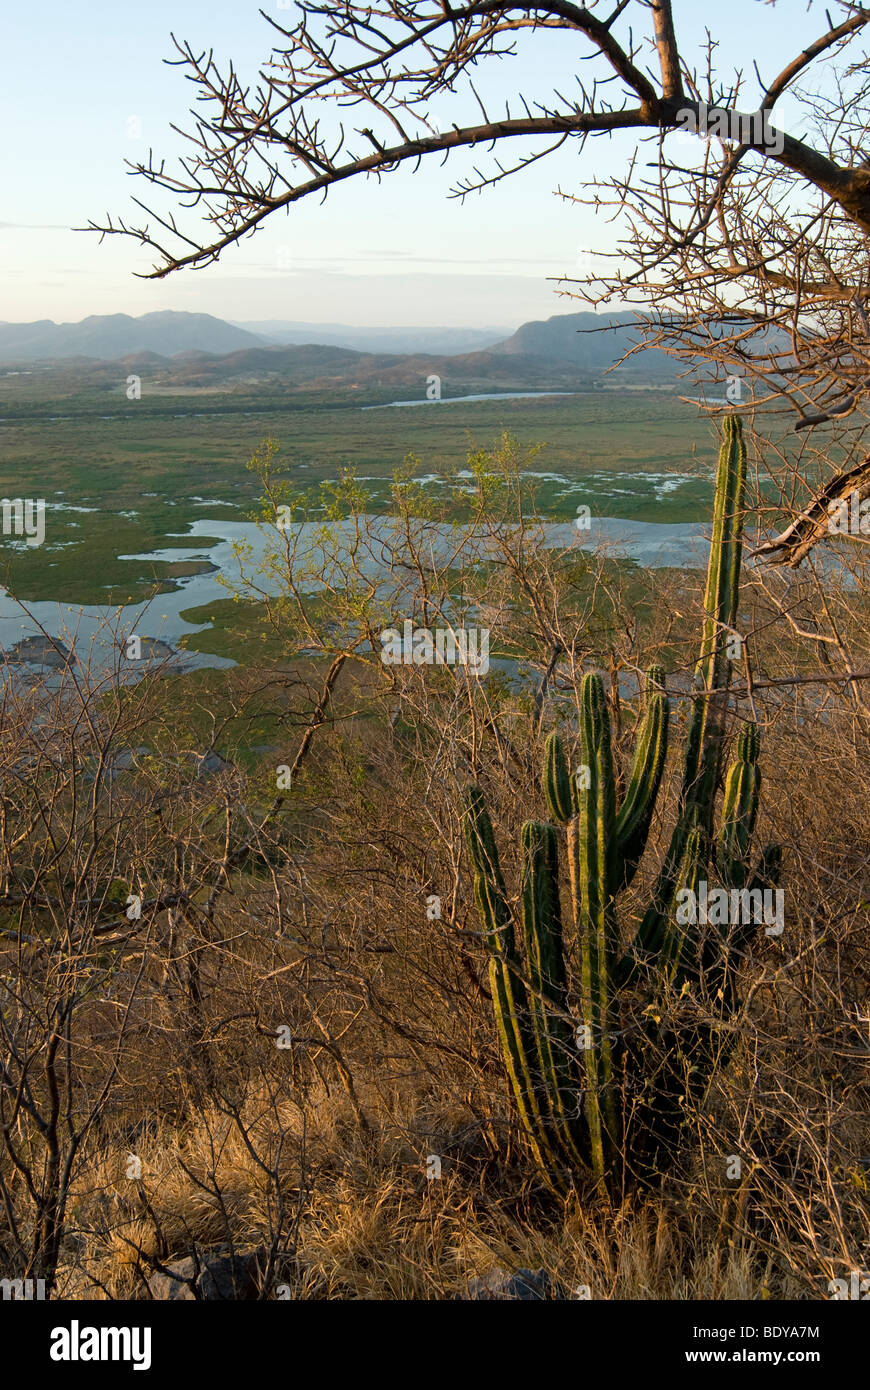 Swamp at Rio Tempisque in contrast to tropical dry forest on the limestone hills with Stenocereus aragonii, an endemic cactus Stock Photo